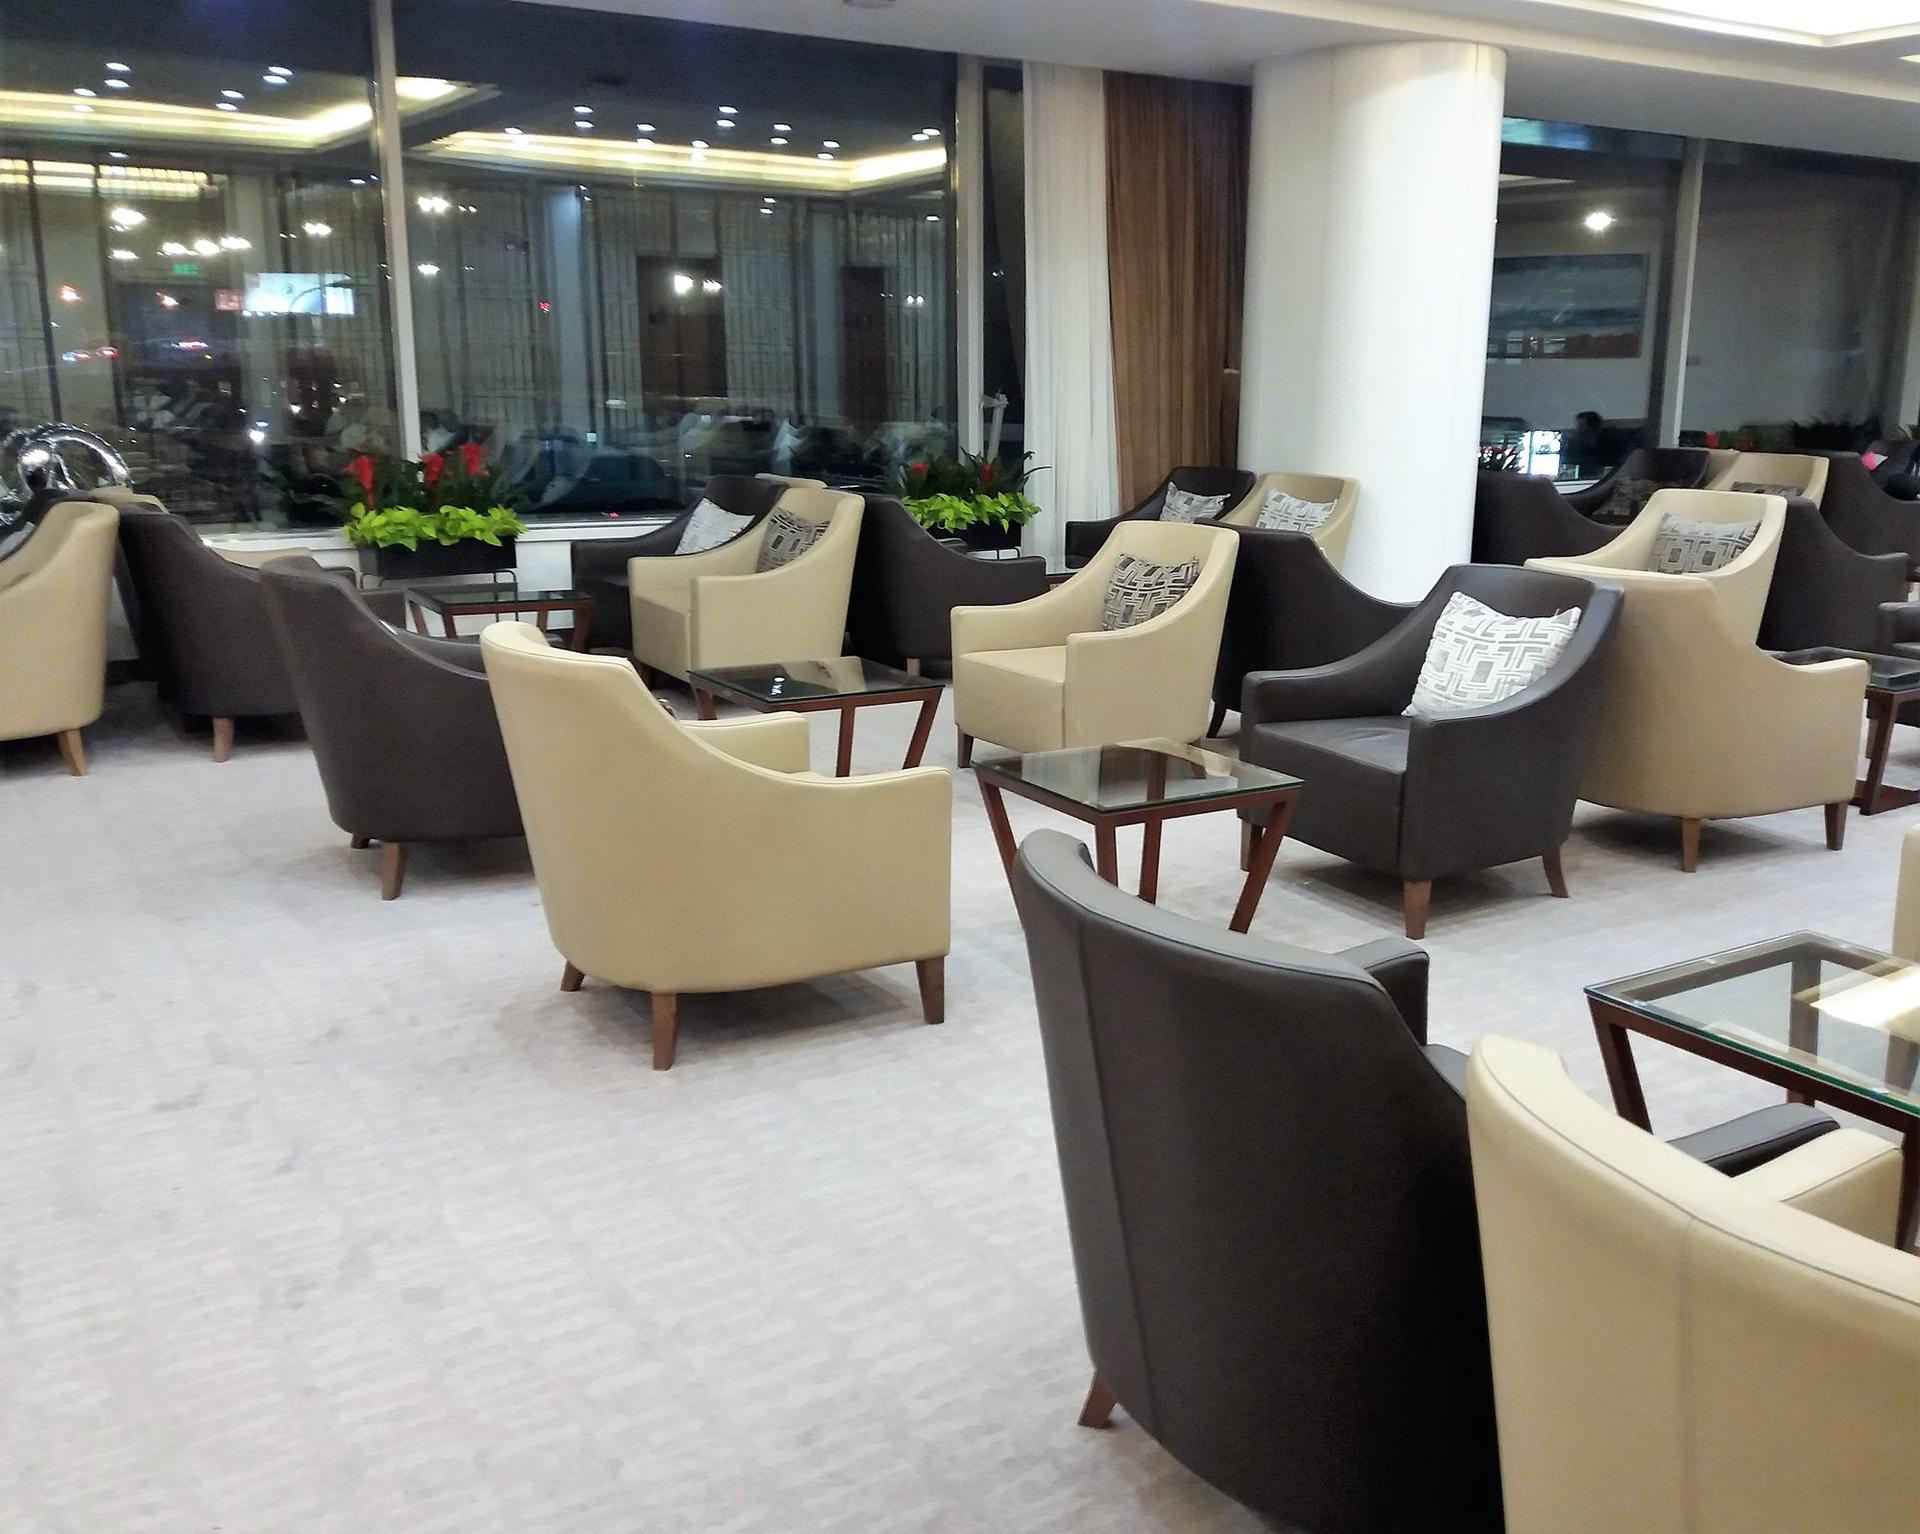 Air China First & Business Class Lounge image 3 of 12